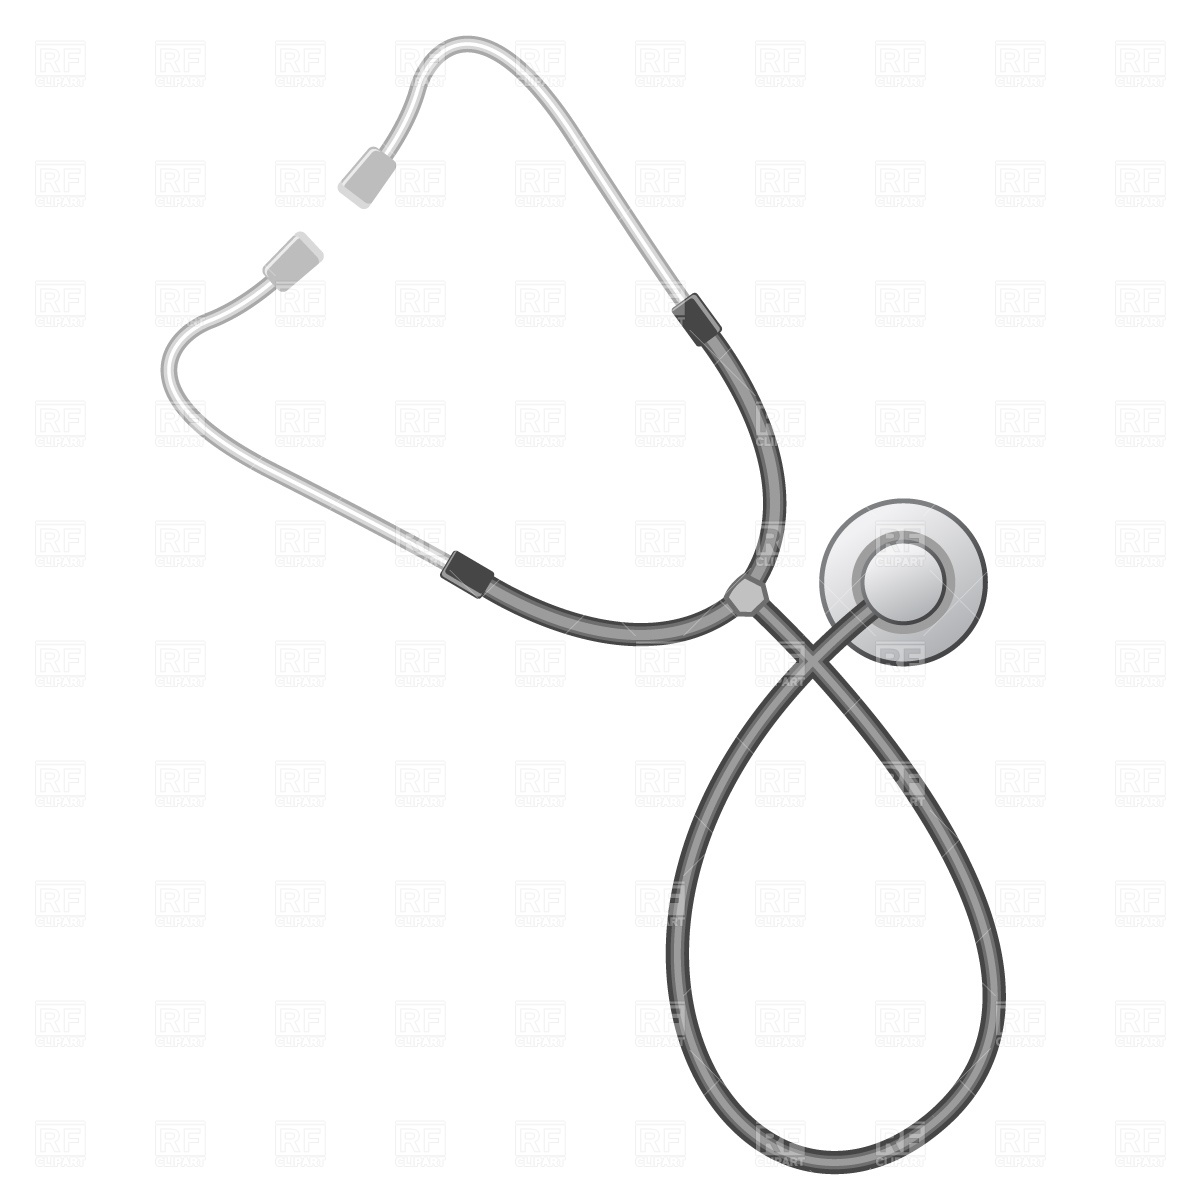 Clipart Catalog   Healthcare Medical   Stethoscope Download Royalty